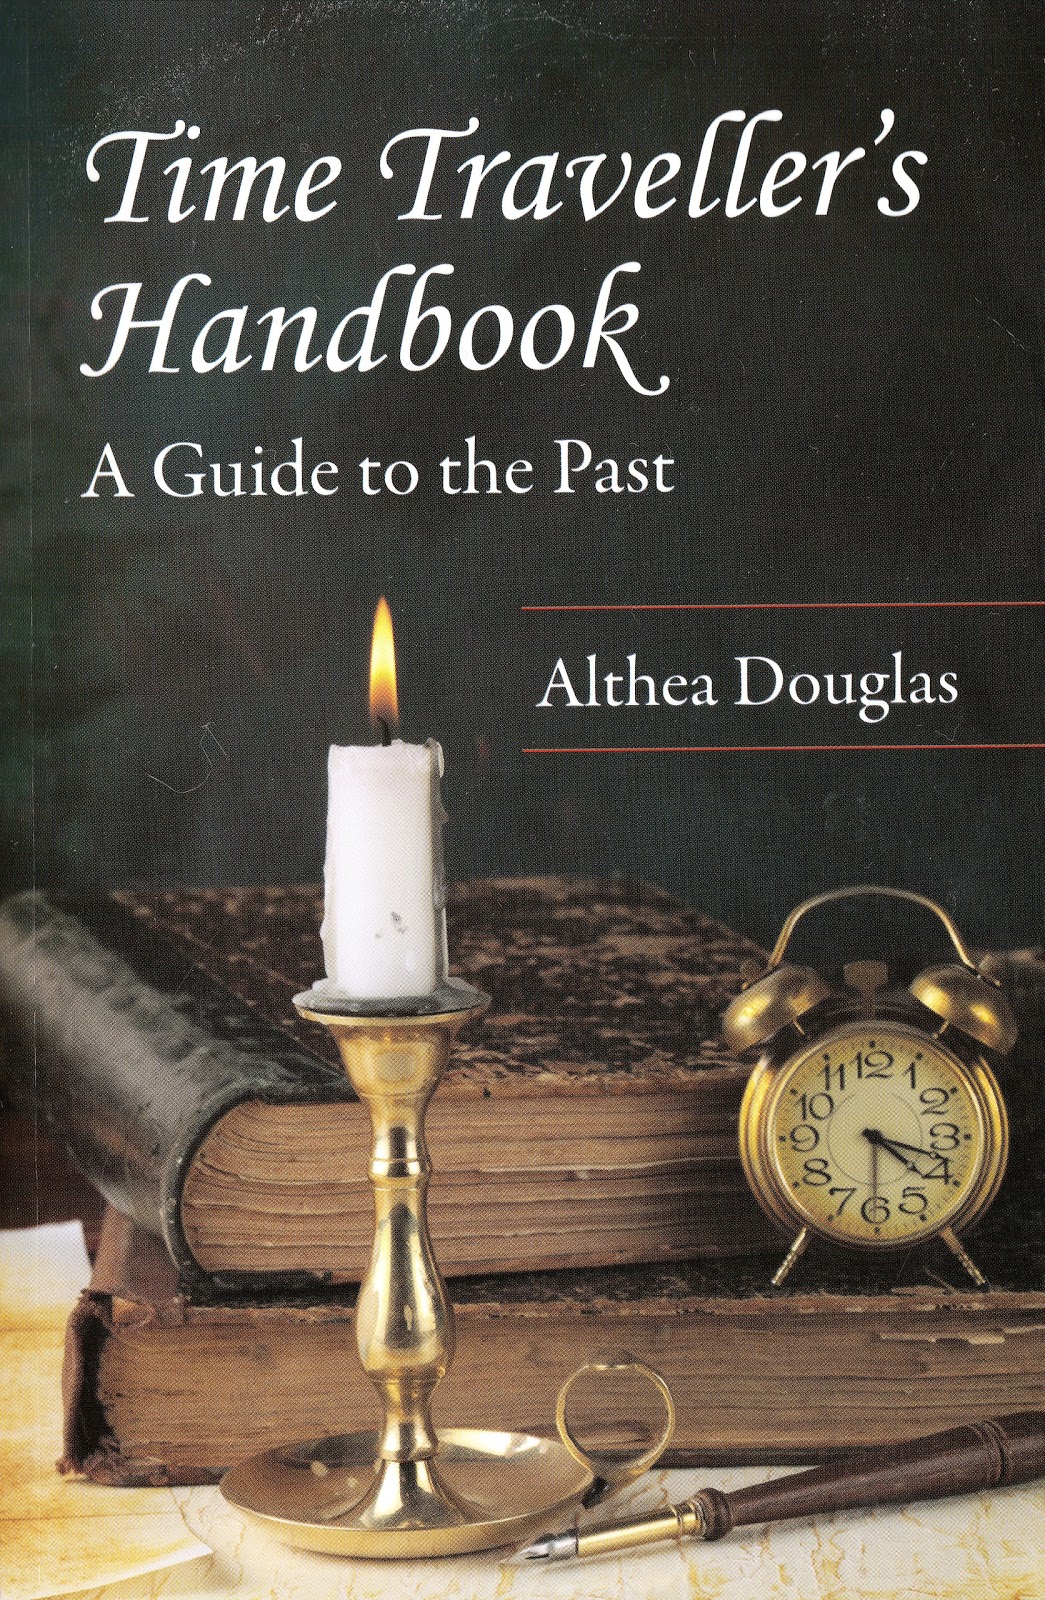 Have You Seen My Roots?: Book Review - Time Traveller's Handbook by ...